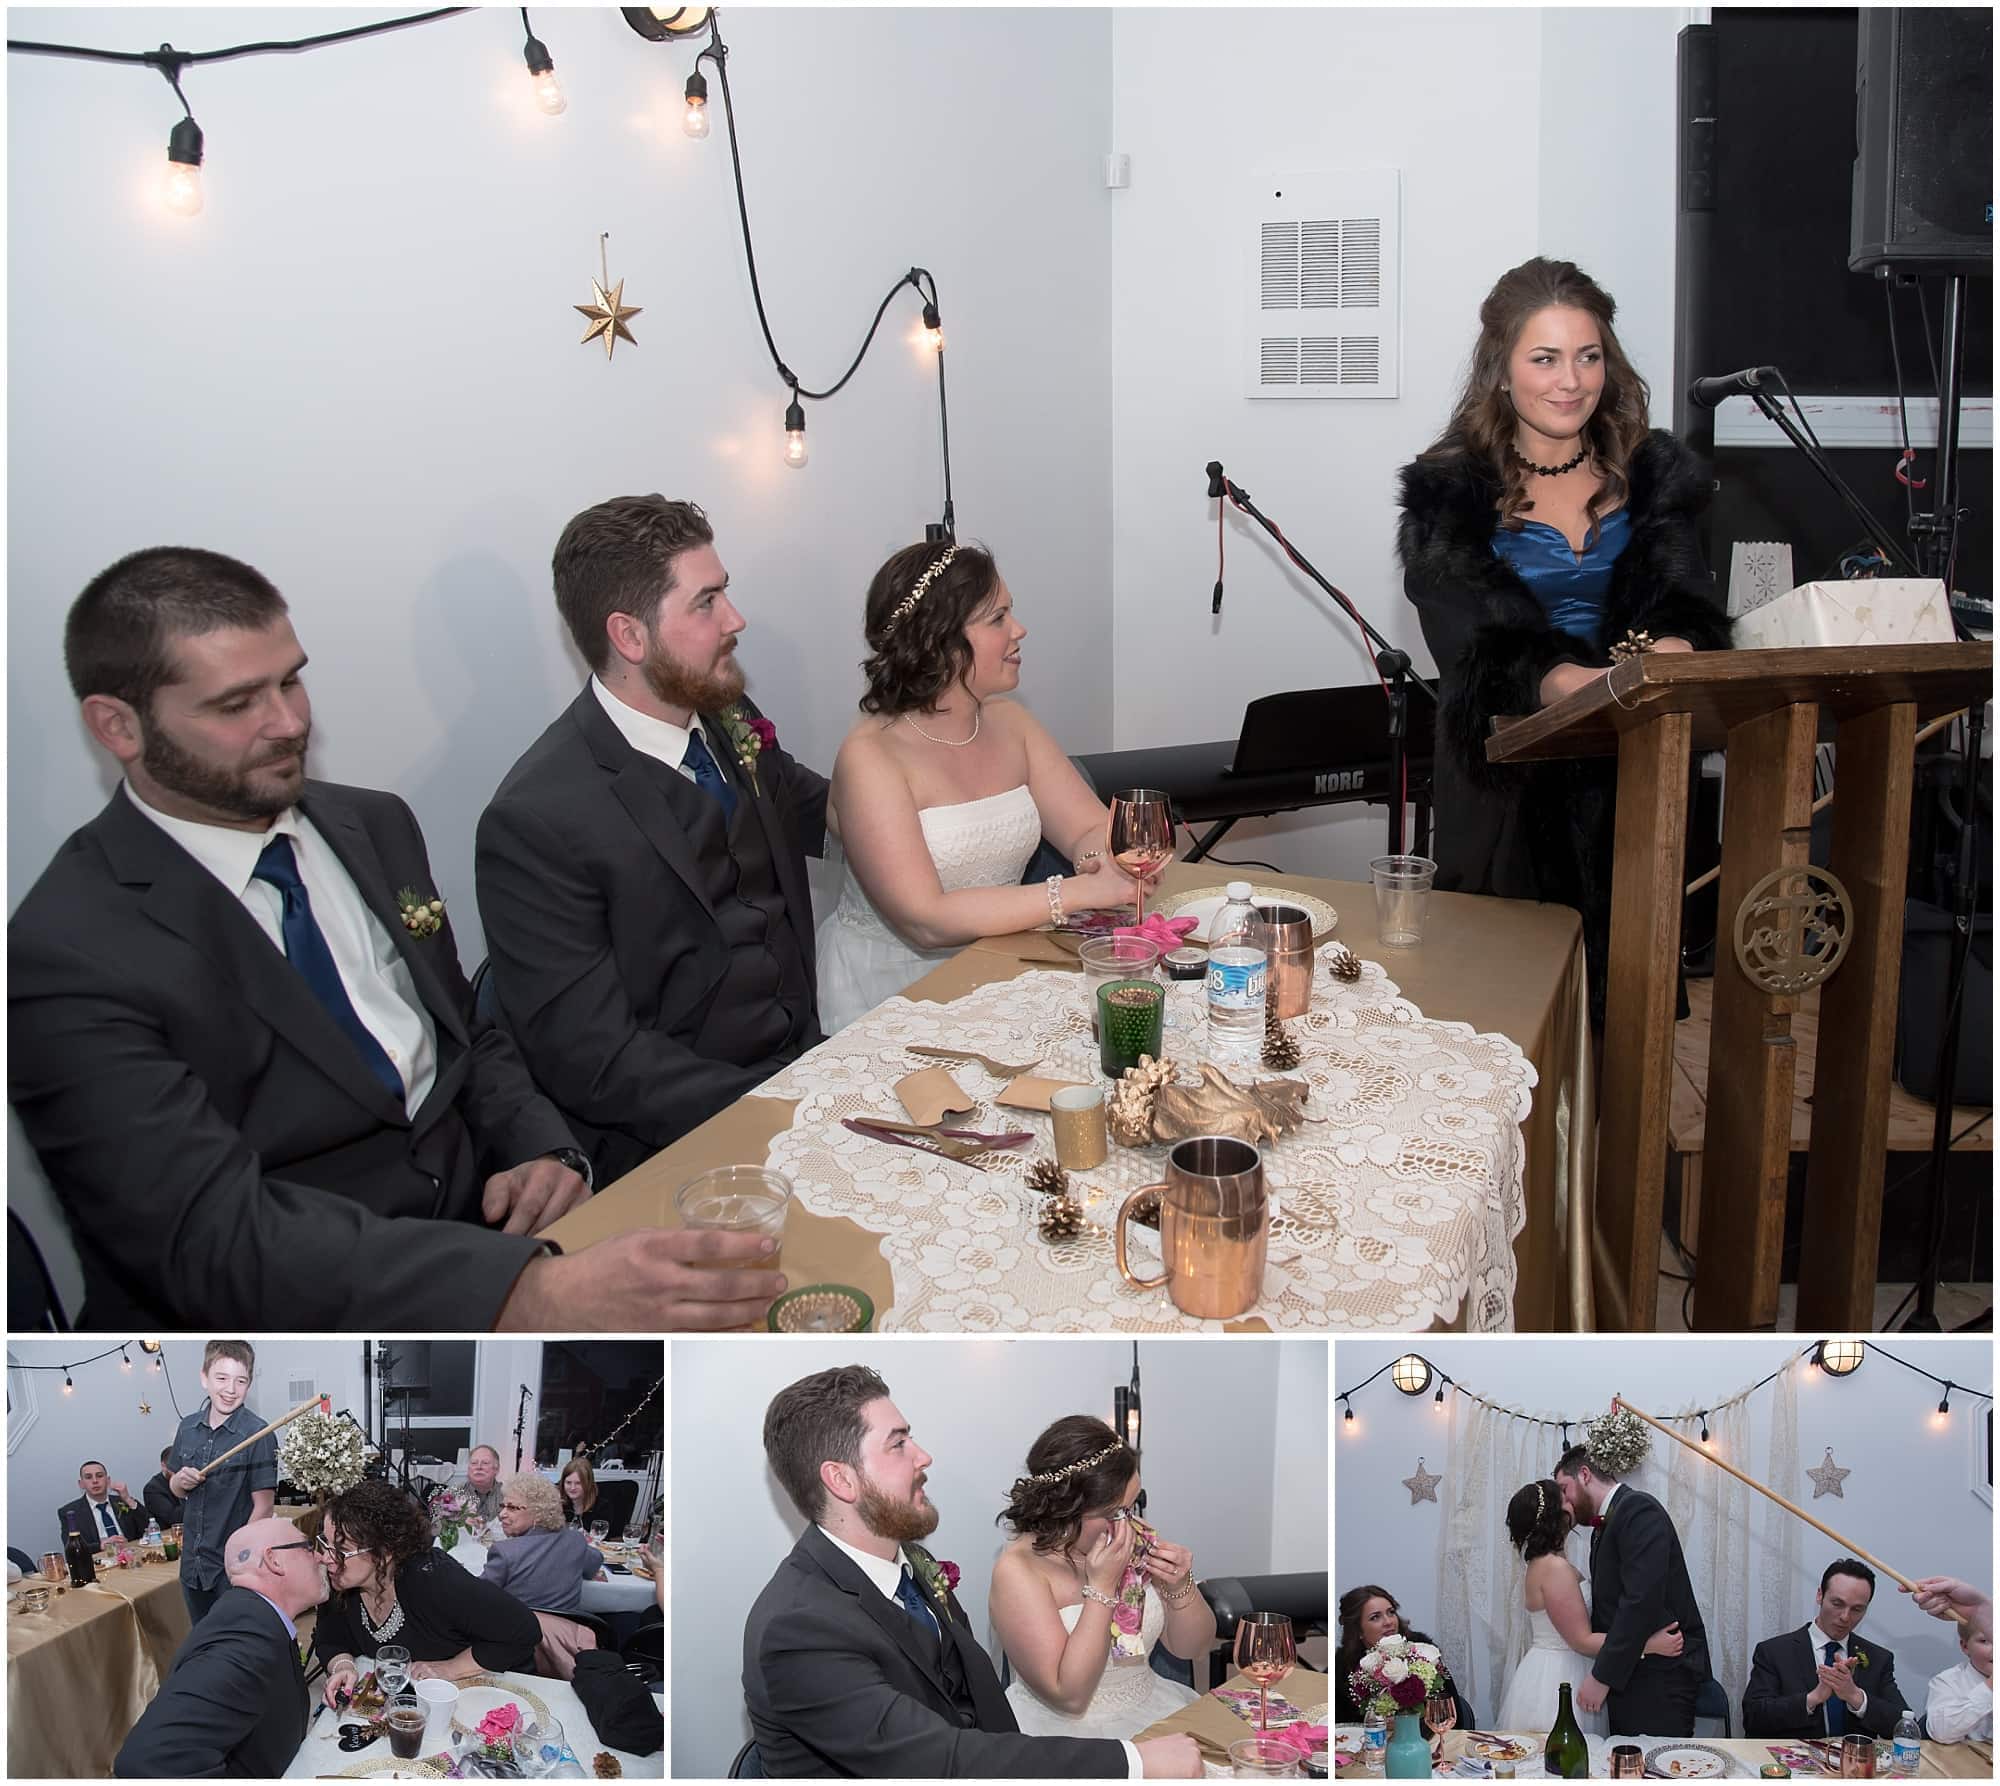 The bride and groom during their wedding reception, kissing under the mistletoe during their winter wedding at Fisherman's Cove in Eastern Passage.